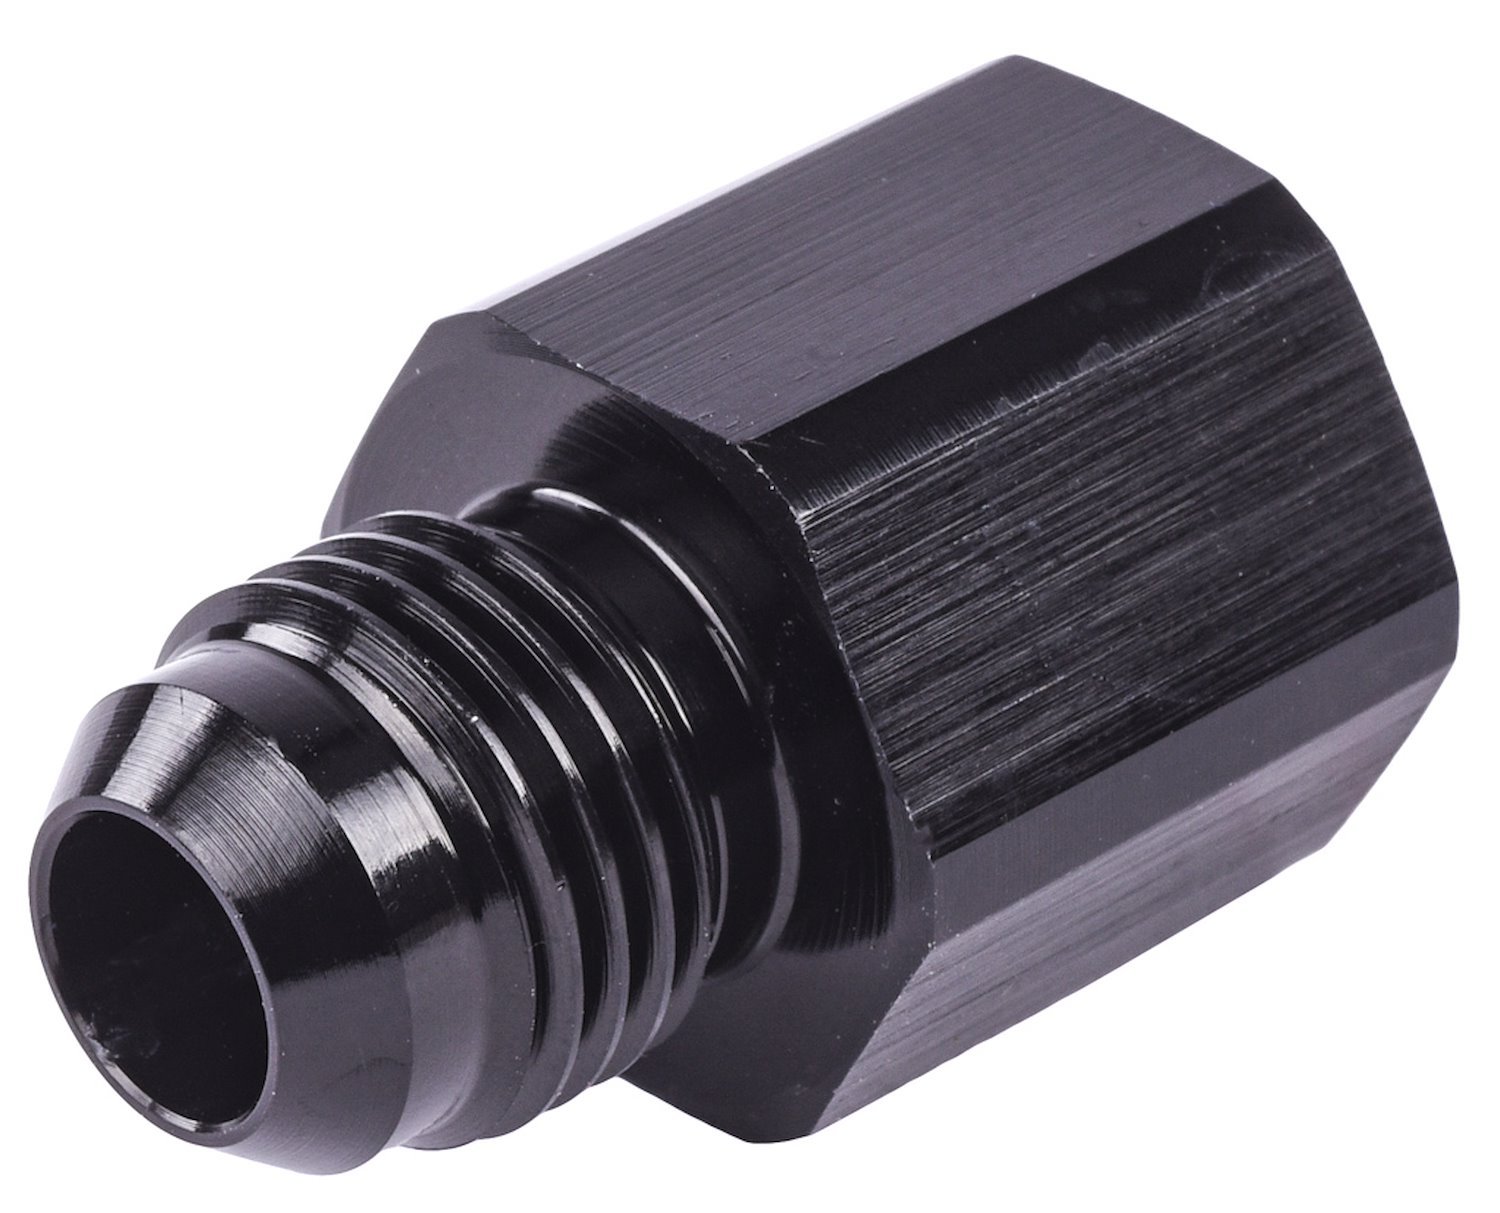 AN to Fuel Injection Adapter Fitting [-6 AN Male to 14mm x 1.5 Female Thread, Black]